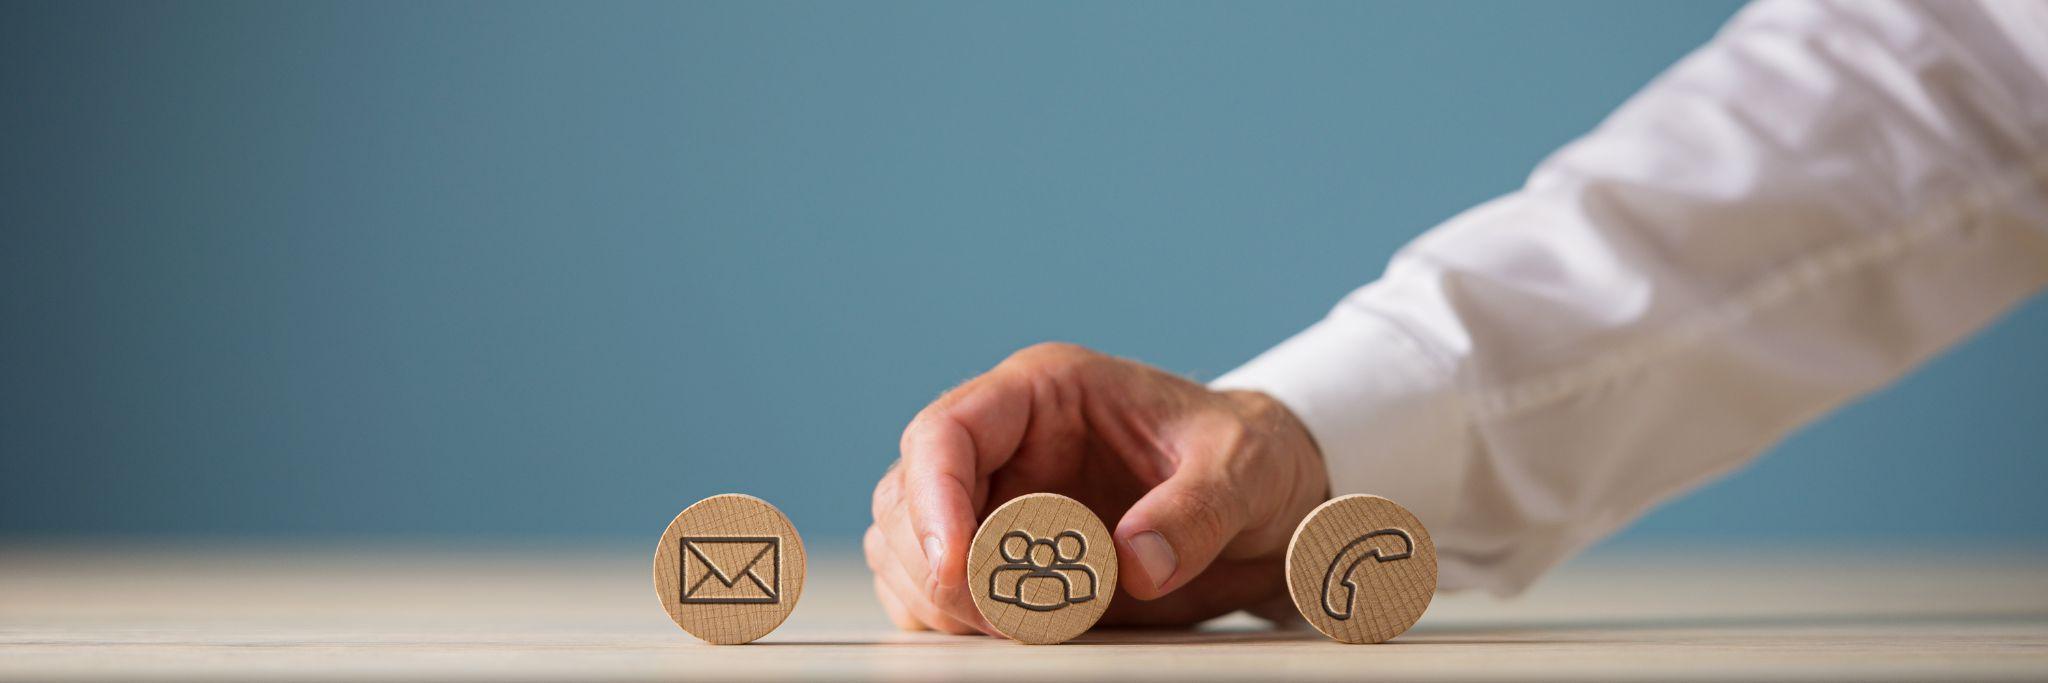 customer service representative placing three wooden cut circles with contact and information icons on them in a row.